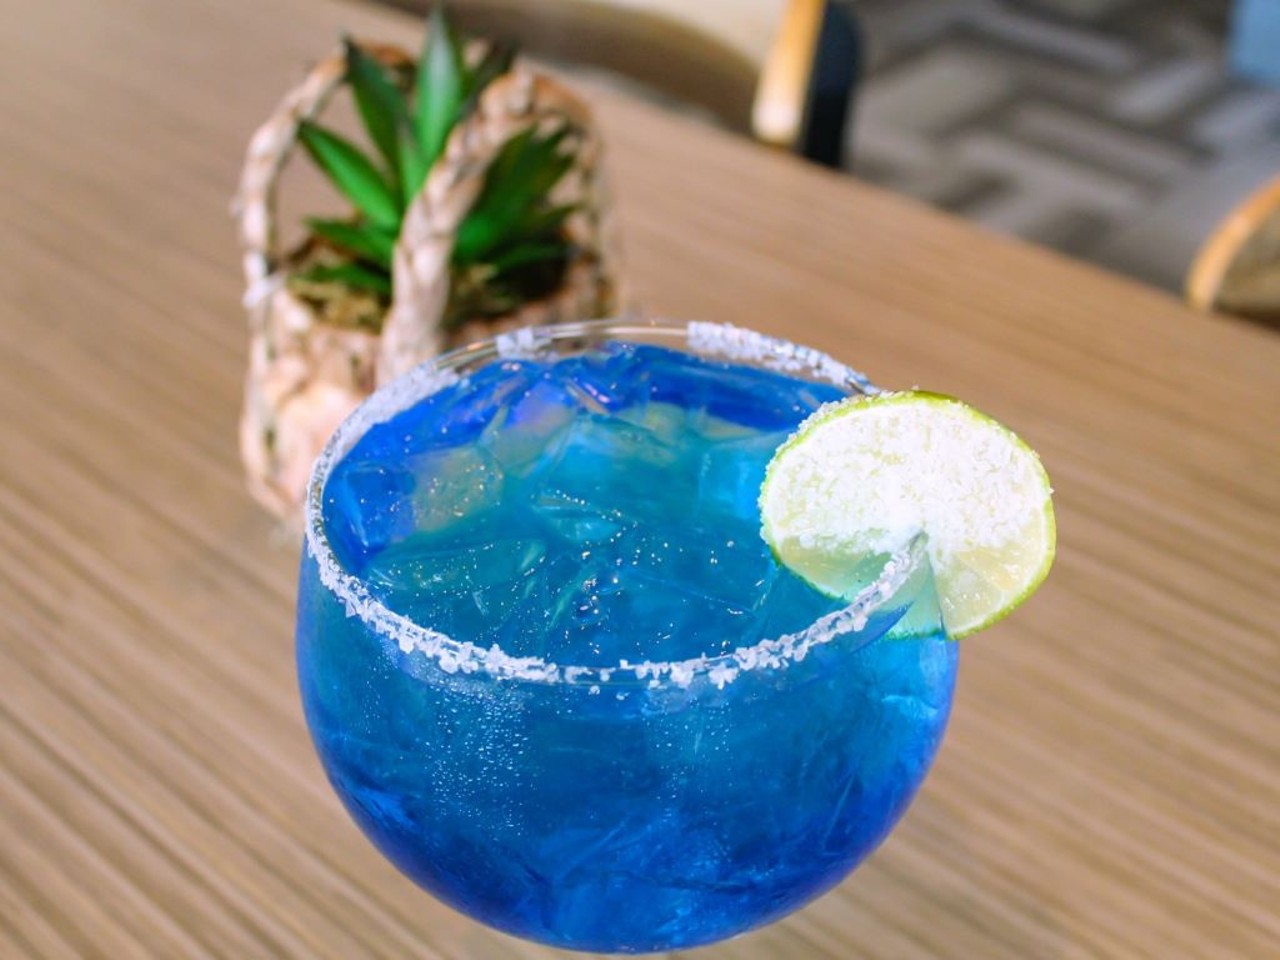 Garibaldi 
2430 E Semoran Blvd., Apopka
Order the Blue Moon margarita at Garibaldi. With 100 percent blue agave, Cointreau, sour mix and a splash of blue Curacao, you won't regret it. Unless you have three or four. Then we can't make any promises.
